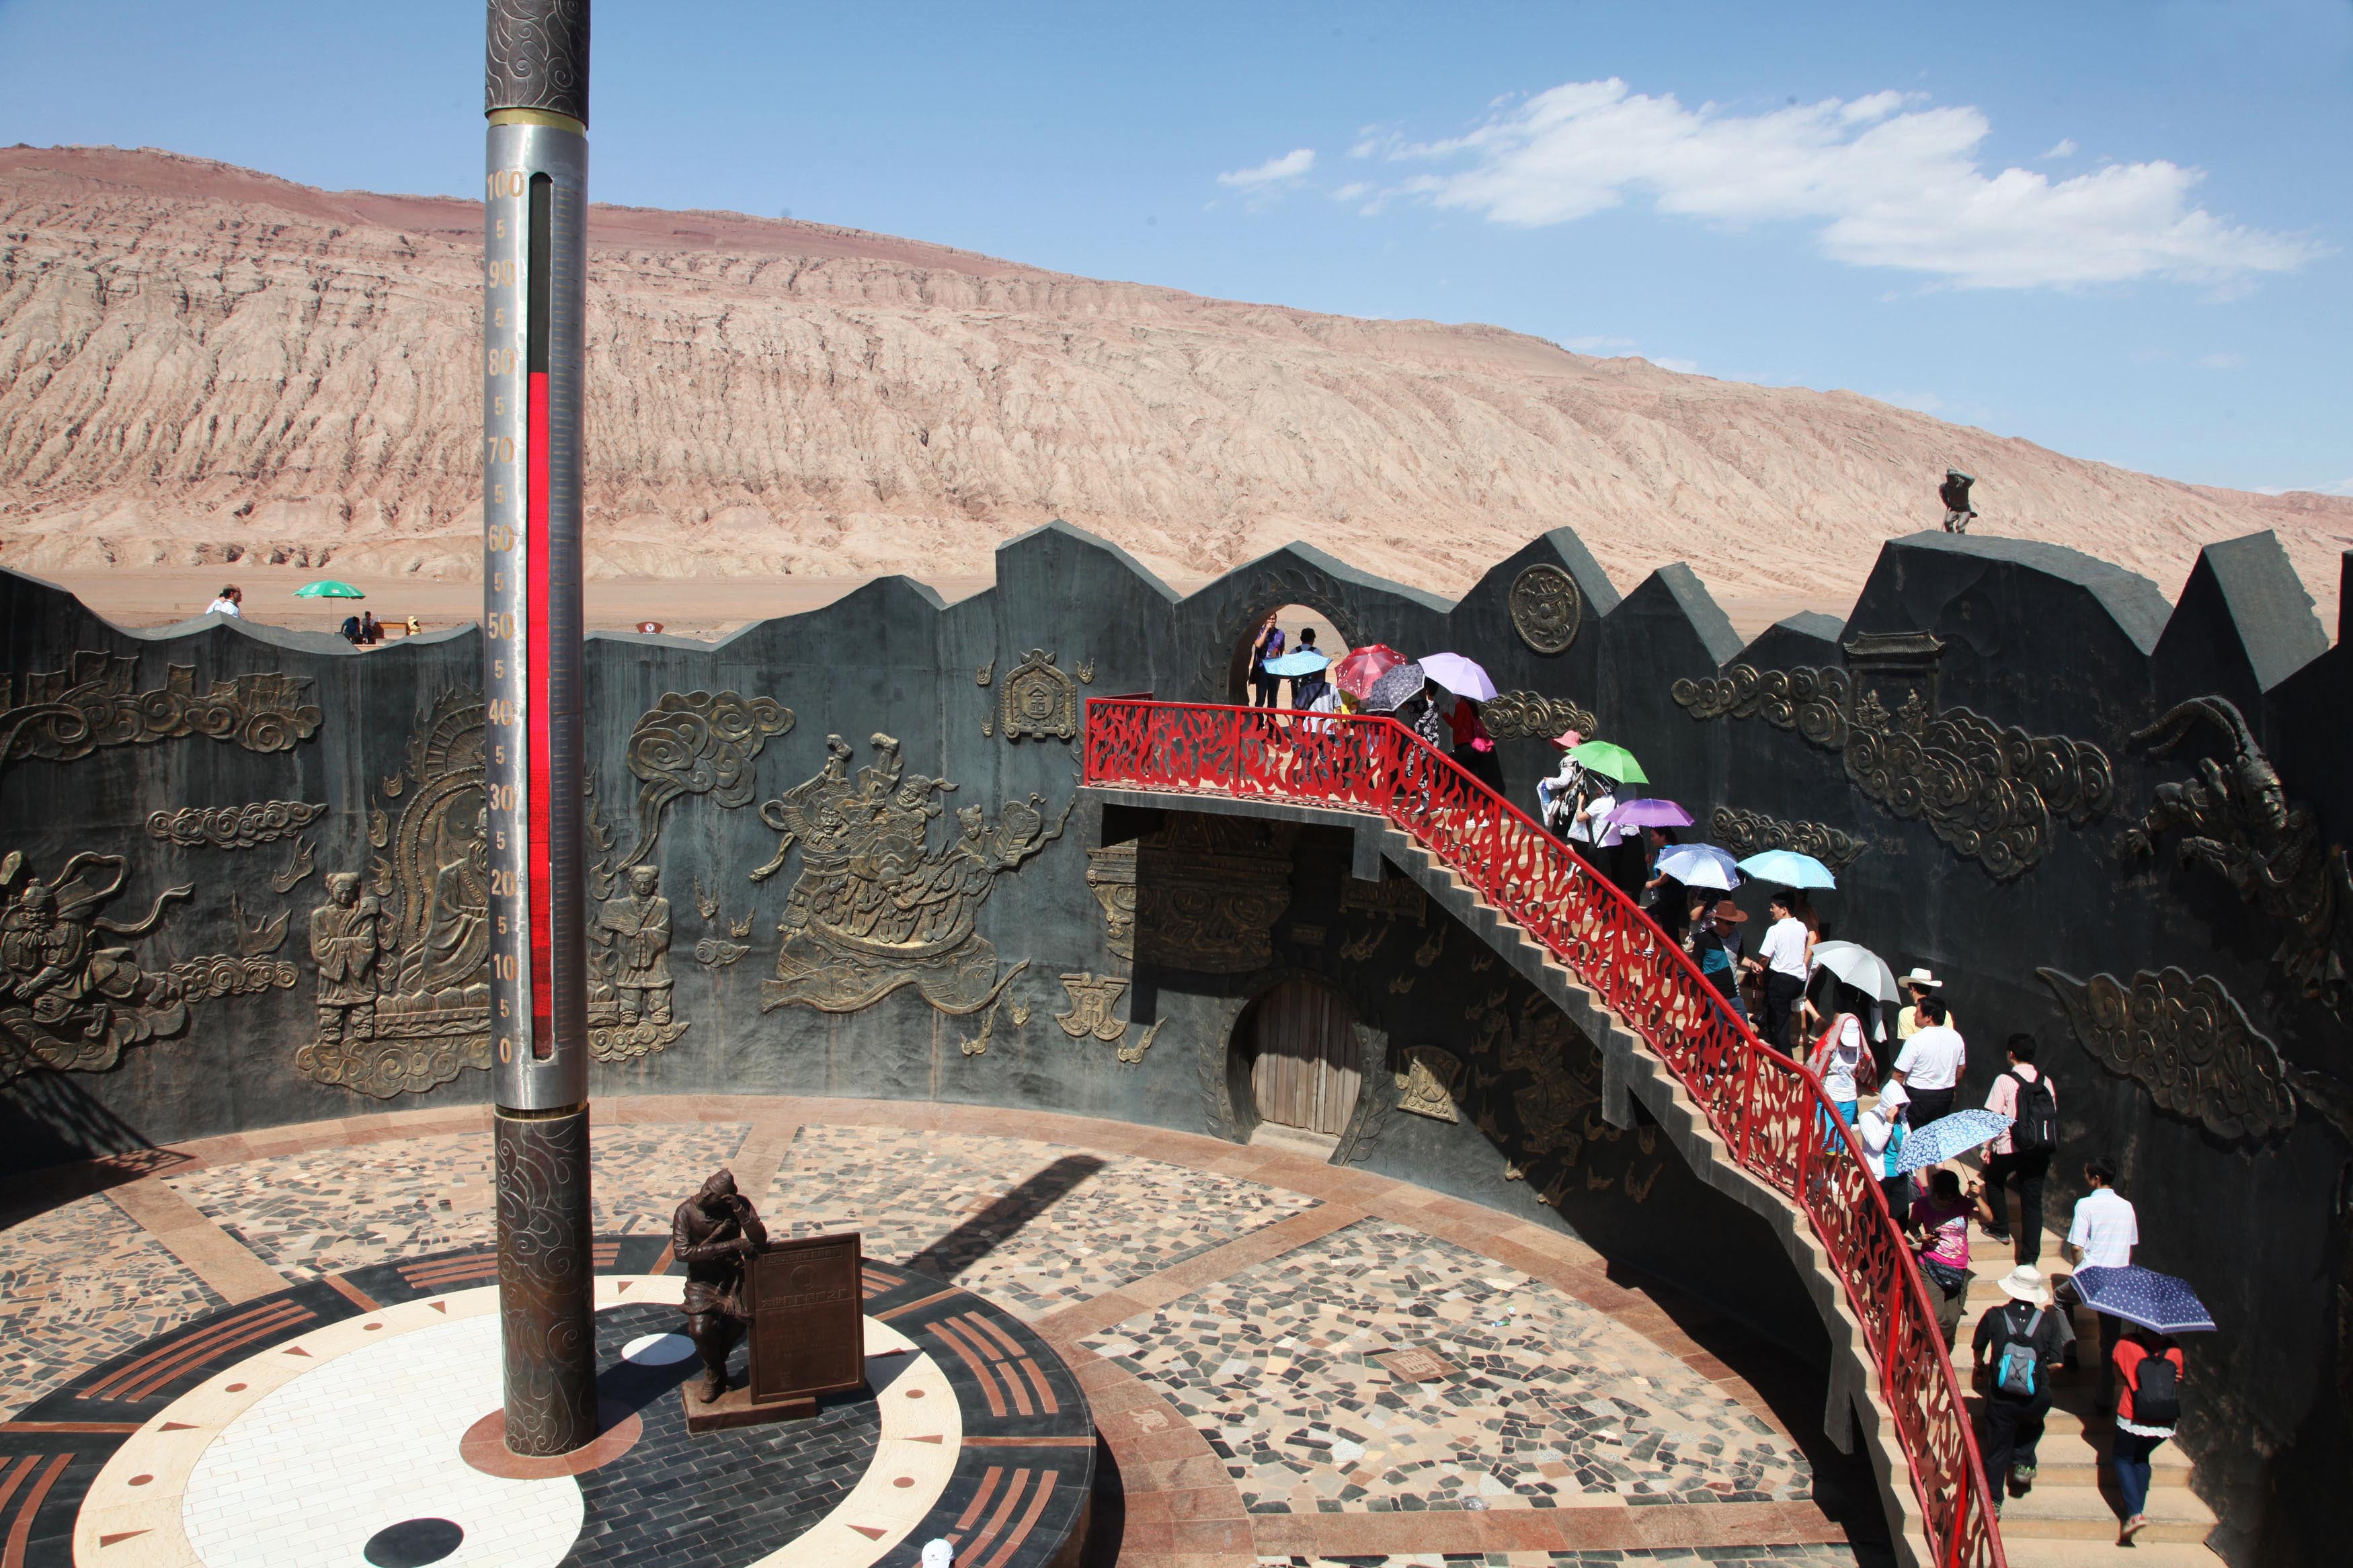 File photo from 2013 shows a massive thermometer installed at the Flaming Mountains of Turpan in northwest China’s Xinjiang region displaying a surface temperature of 78C